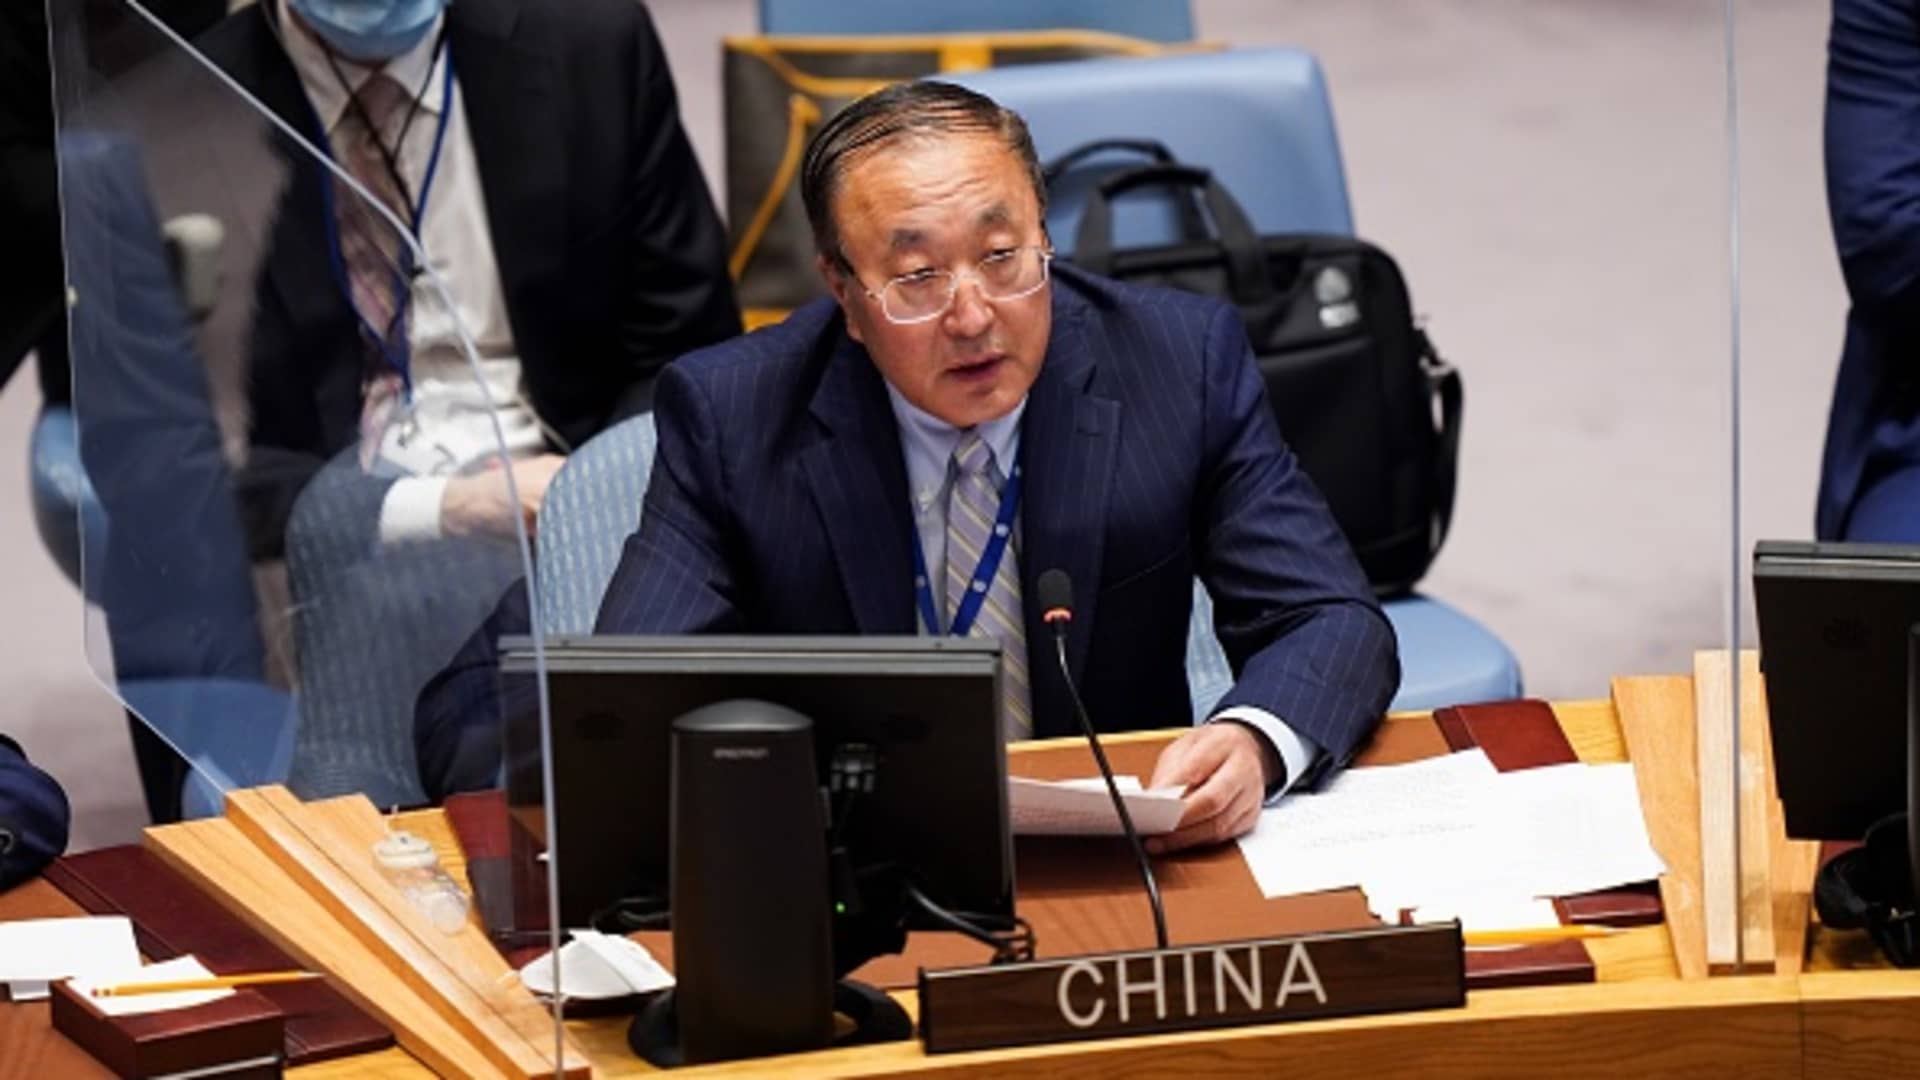 Zhang Jun, China's permanent representative to the United Nations, speaks at a Security Council high-level open debate on climate and security at the UN headquarters in New York, Sept. 23, 2021.